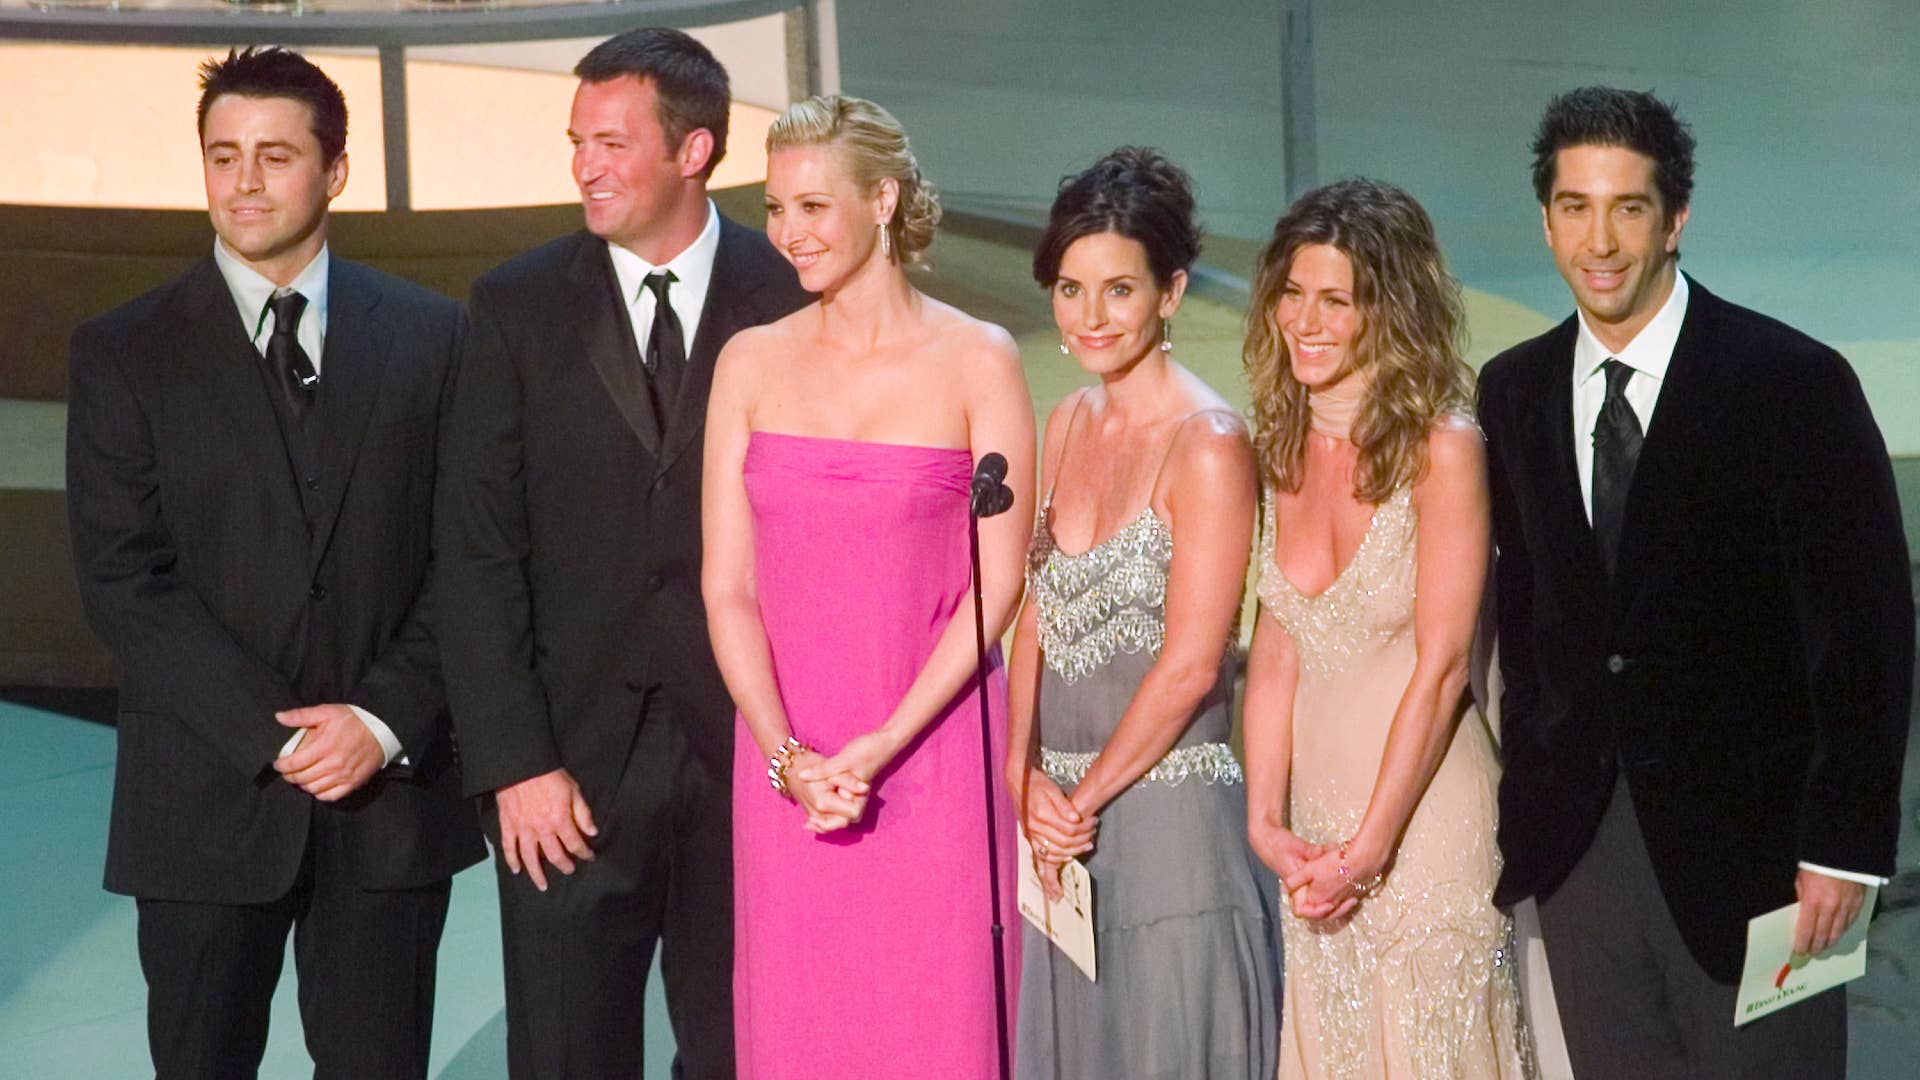 The cast of the NBC comedy Friends is pictured in an archival photo